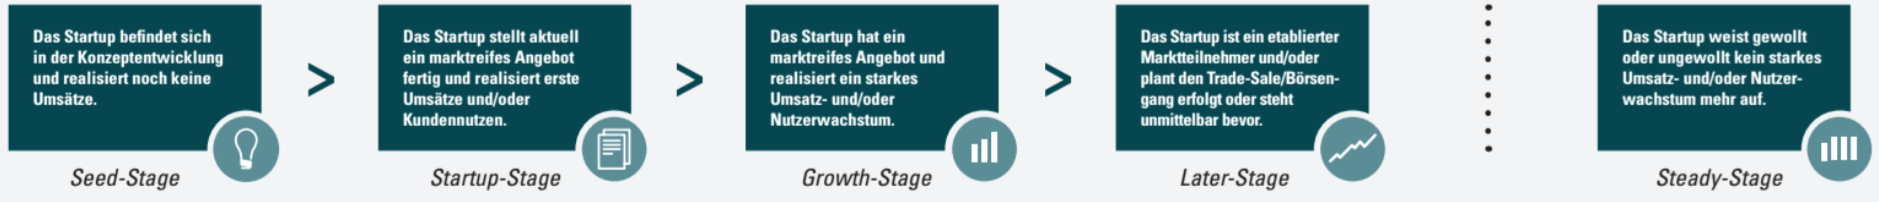 Figure 1: 5 Startup Stages in terms of the DSM 2014